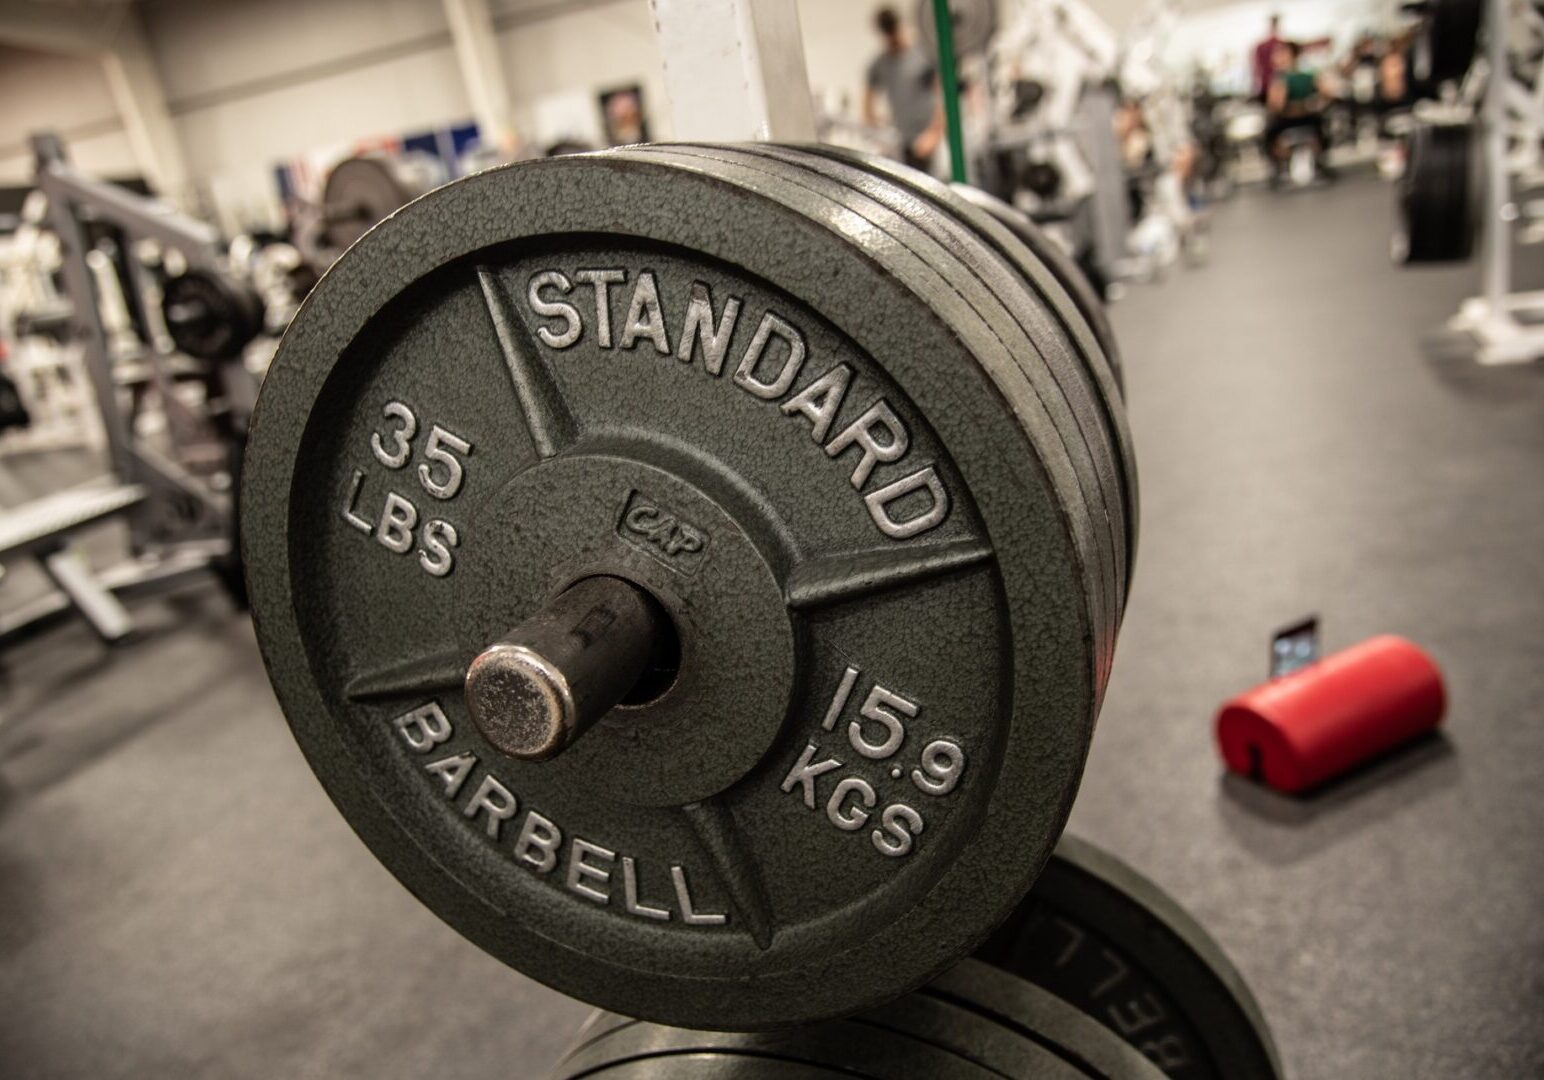 In a gym, a barbell rests on a bench.